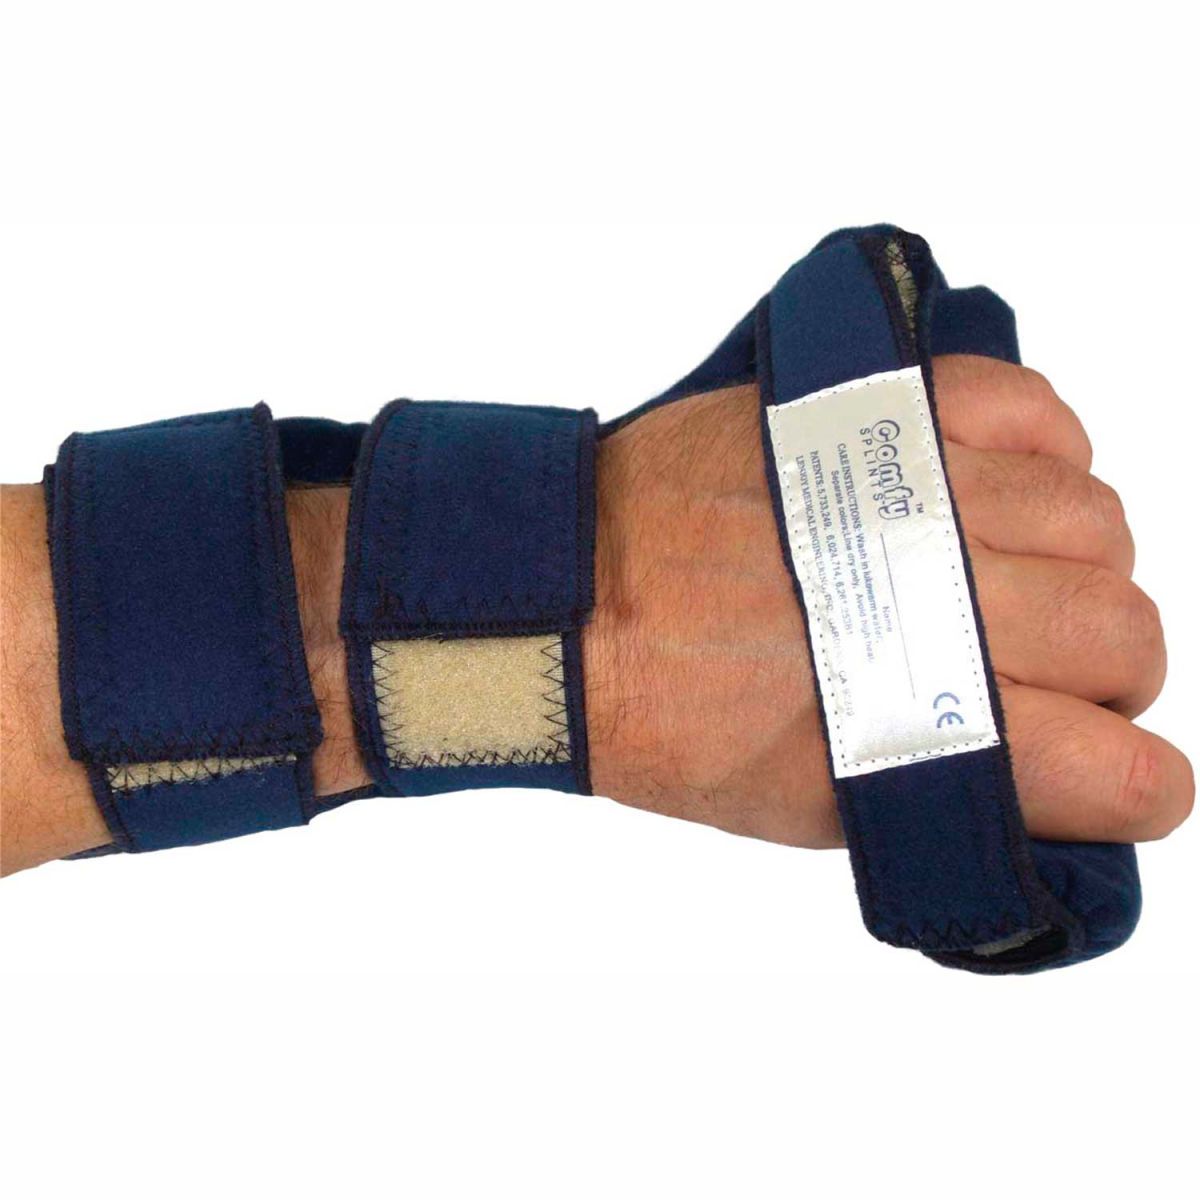 B2196745 Adult Medium, Right Comfy Splints Comfy C-Grip Hand Orthosis with 1 Cover & 2 Soft Rolls -  Fabrication Enterprises